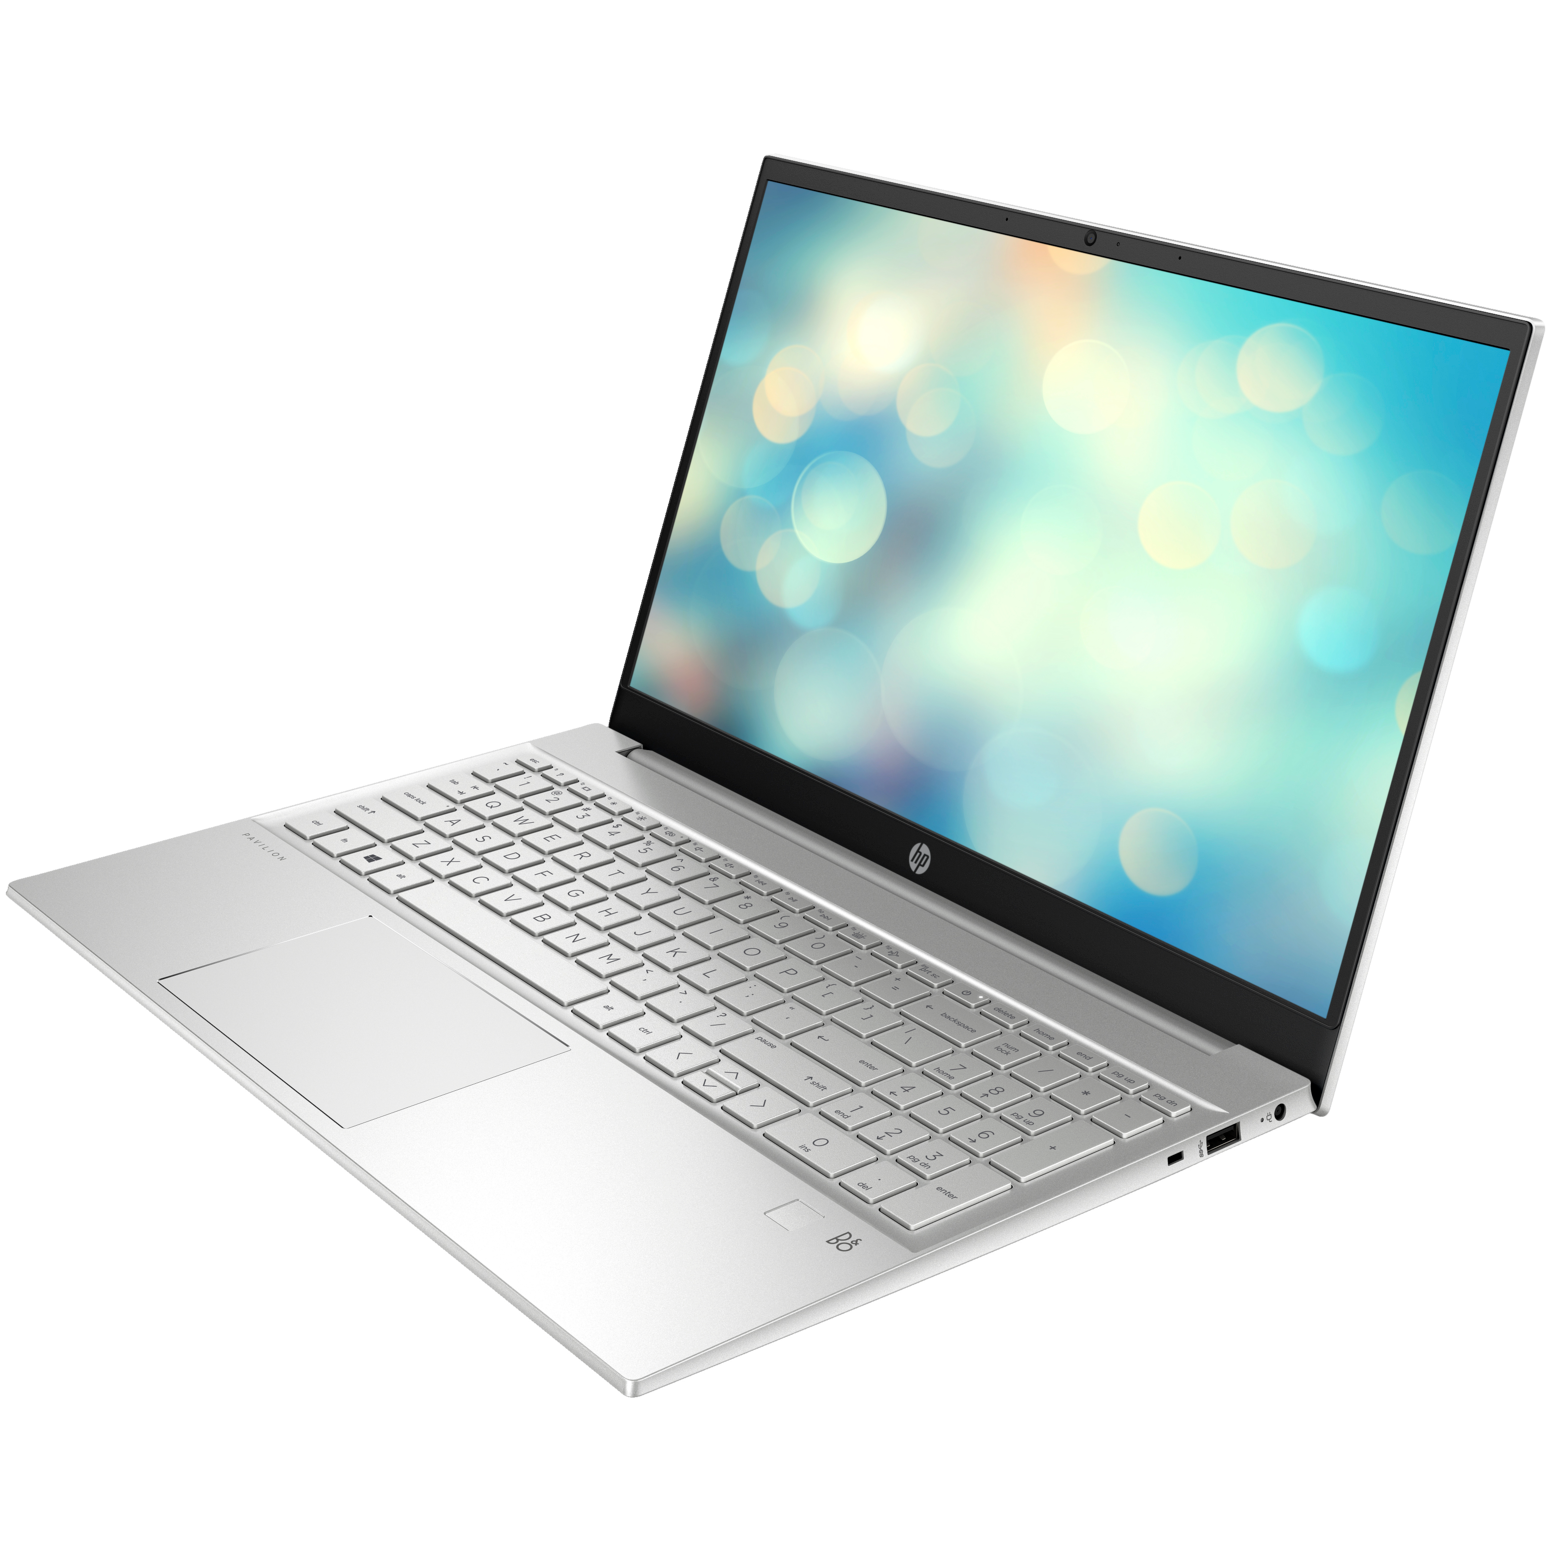 Angled front view of the HP Pavilion 15